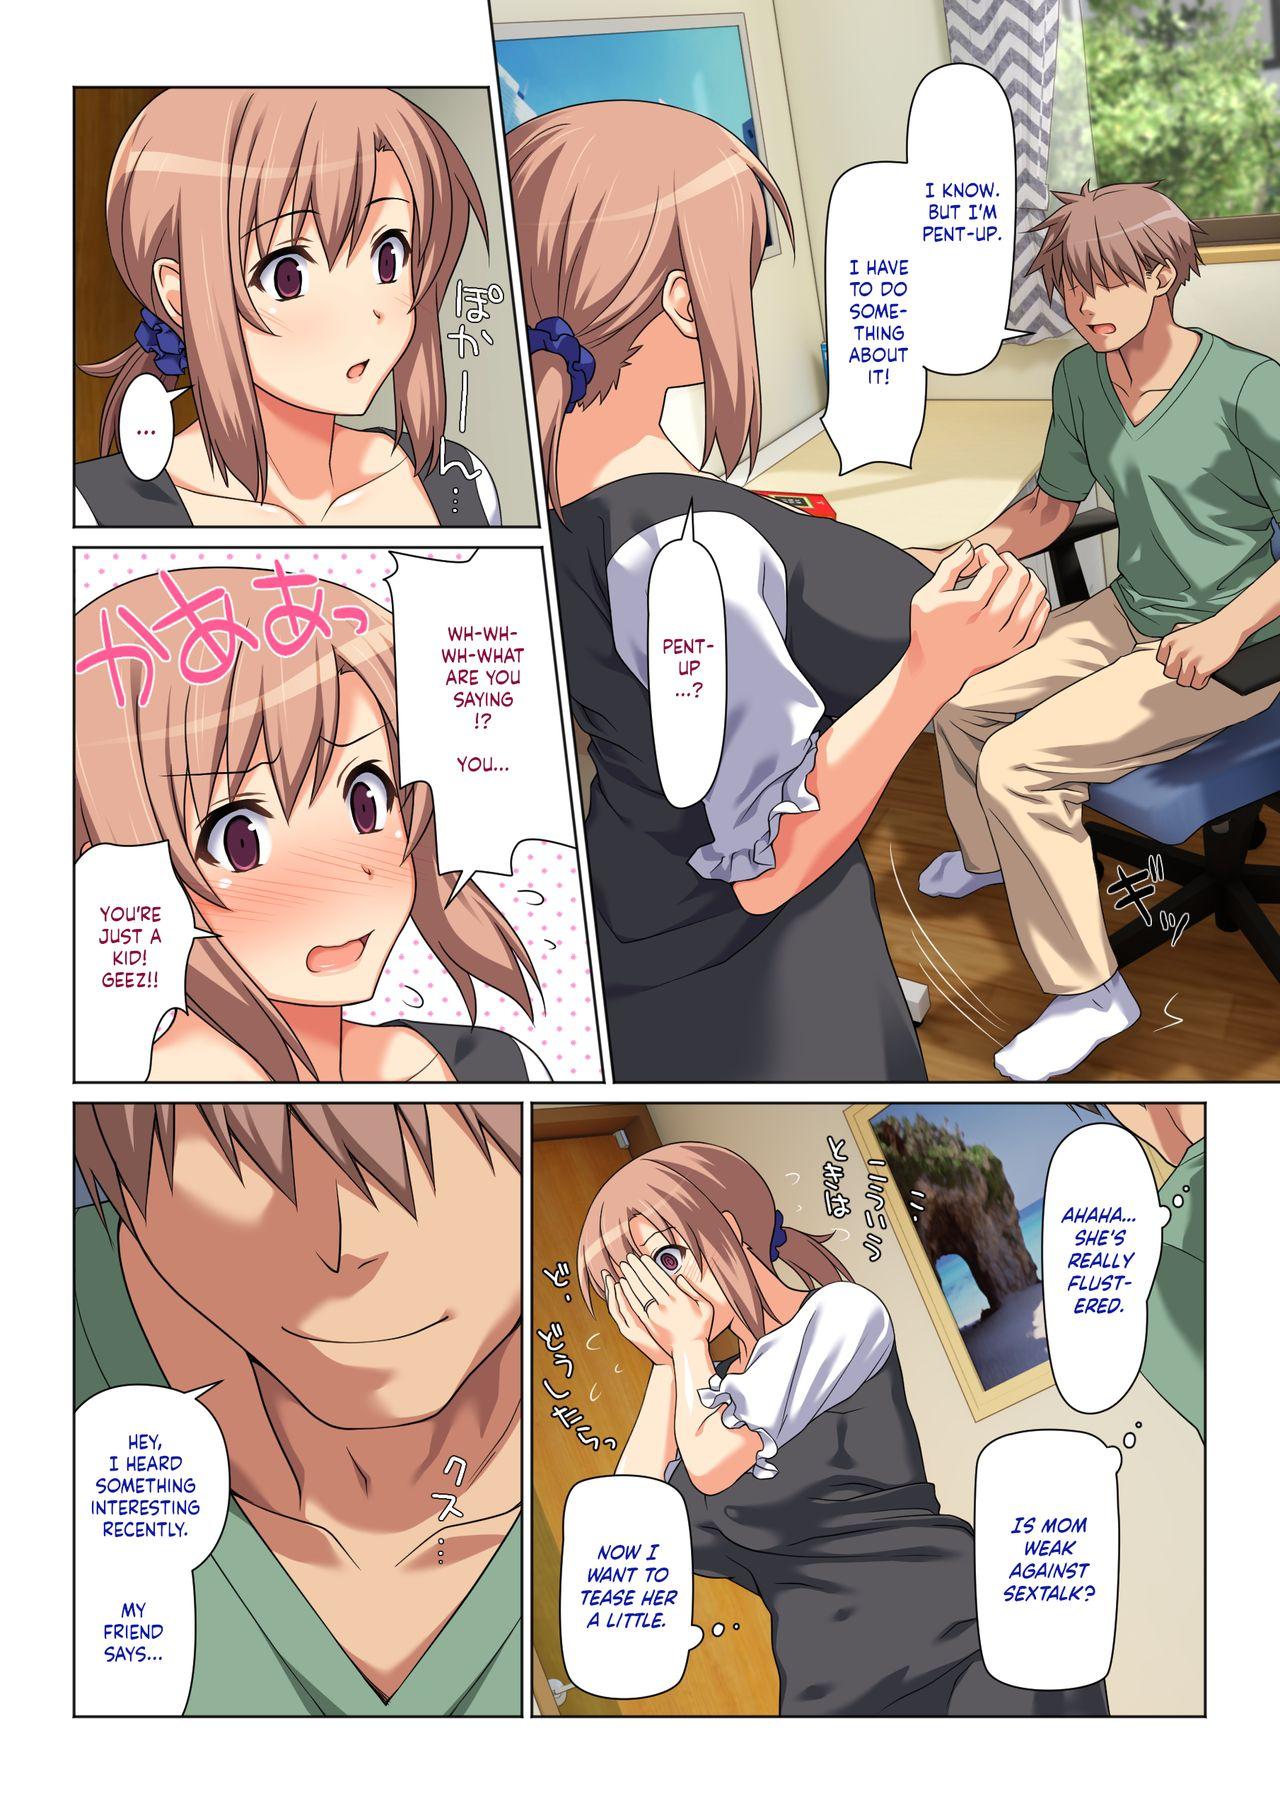 Pounded Seiseki UP o Jouken ni Mainichi Nuite kureru Okaa-san | Mom Will Put Out Everyday On The Condition That His Grades Improve - Original Babe - Page 3